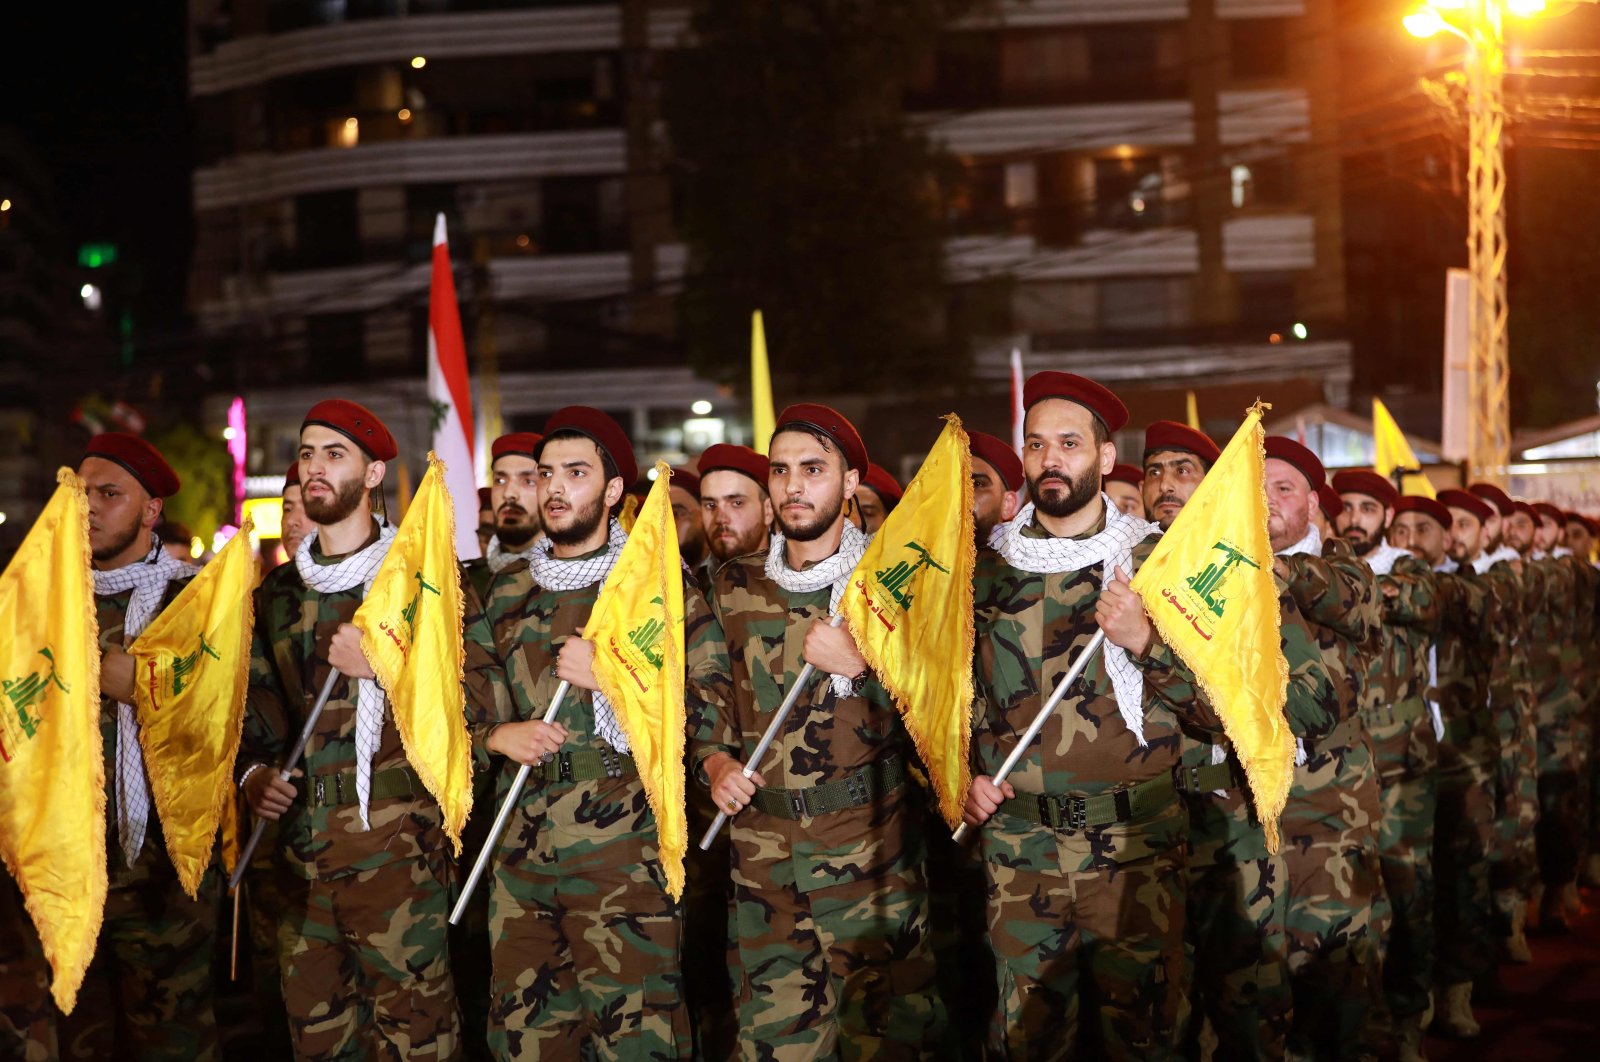 Fighters with the Lebanese Shiite Hezbollah party carry flags as they parade in a southern suburb of the capital Beirut to mark the al-Quds International Day, May 31, 2019. (AFP Photo)